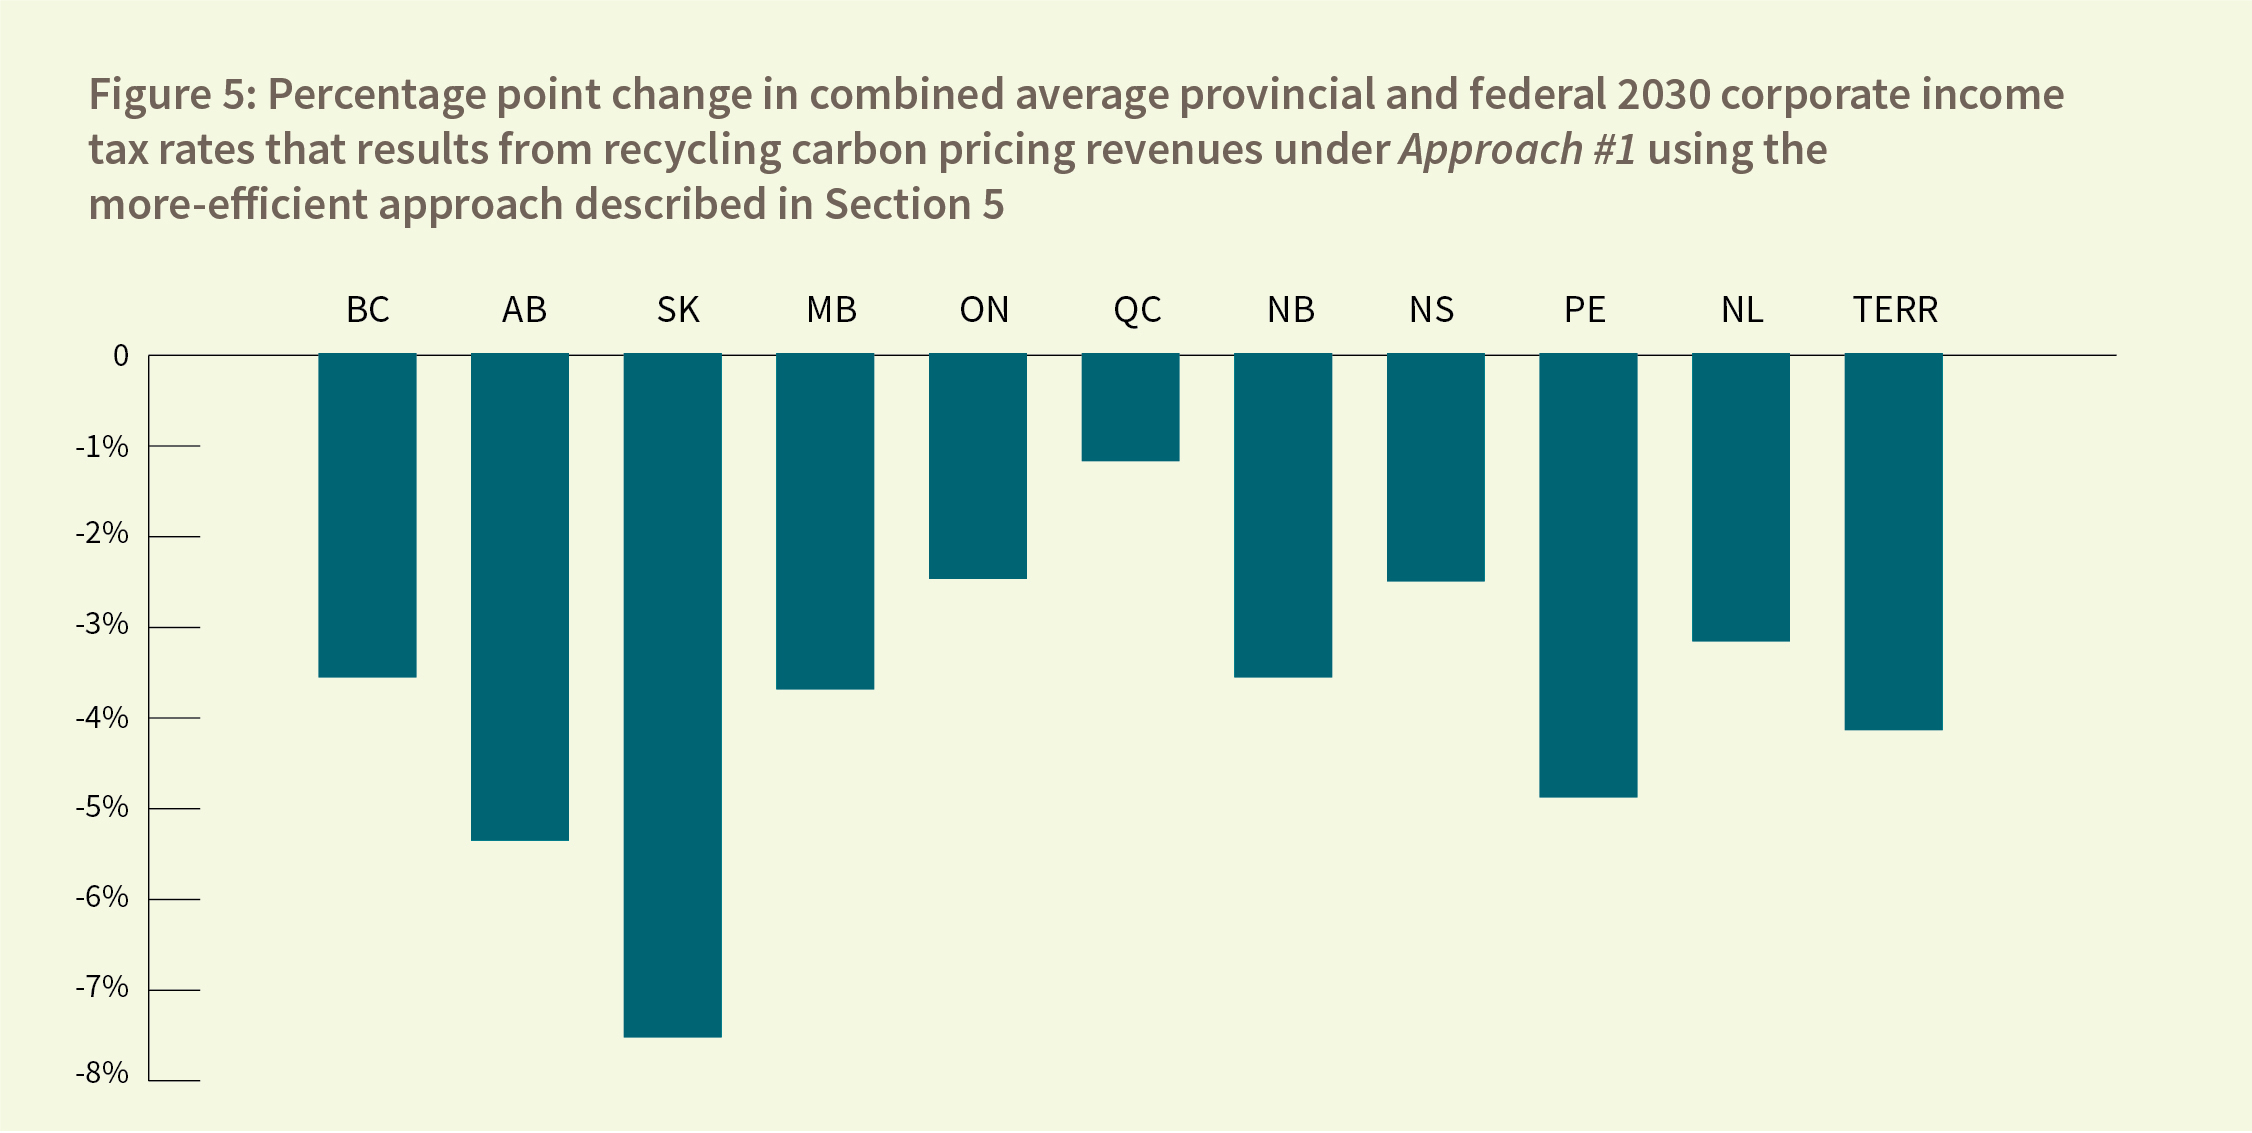 Figure 5: Percentage point change in combined average provincial and federal 2030 corporate income tax rates that results from recycling carbon pricing revenues under Approach #1 using the more-eicient approach described in Section 5